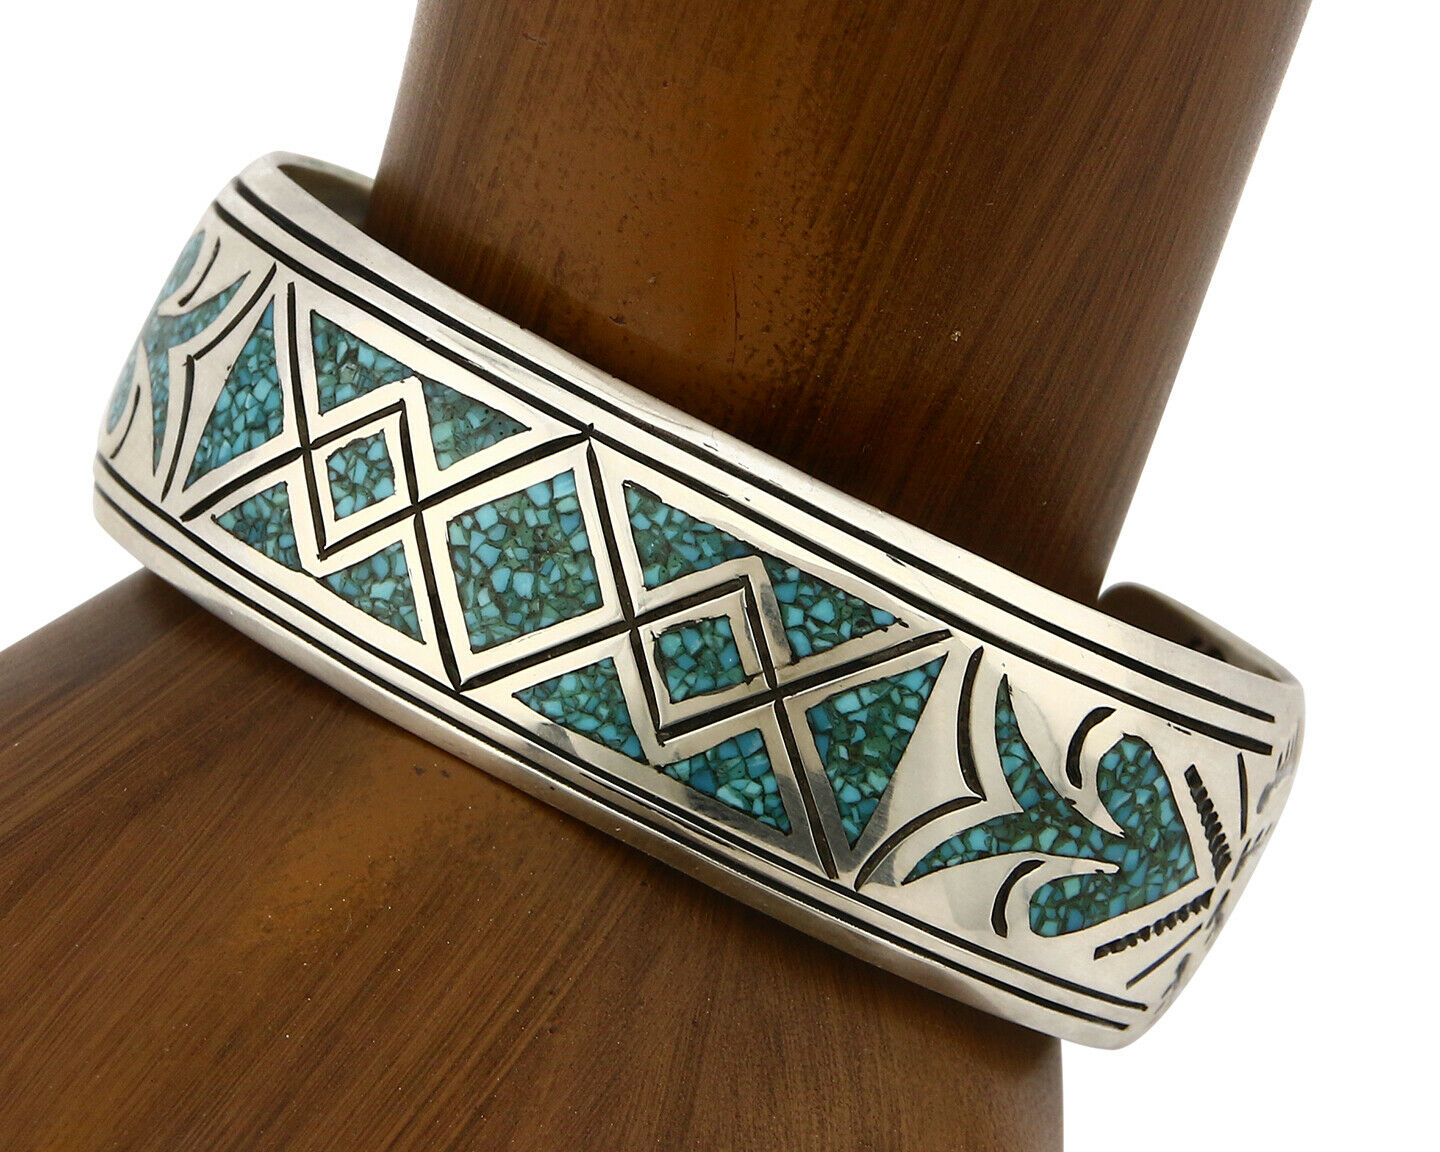 Navajo Bracelet .925 Silver Turquoise Gemstone Cuff Inlaid Signed C.80's